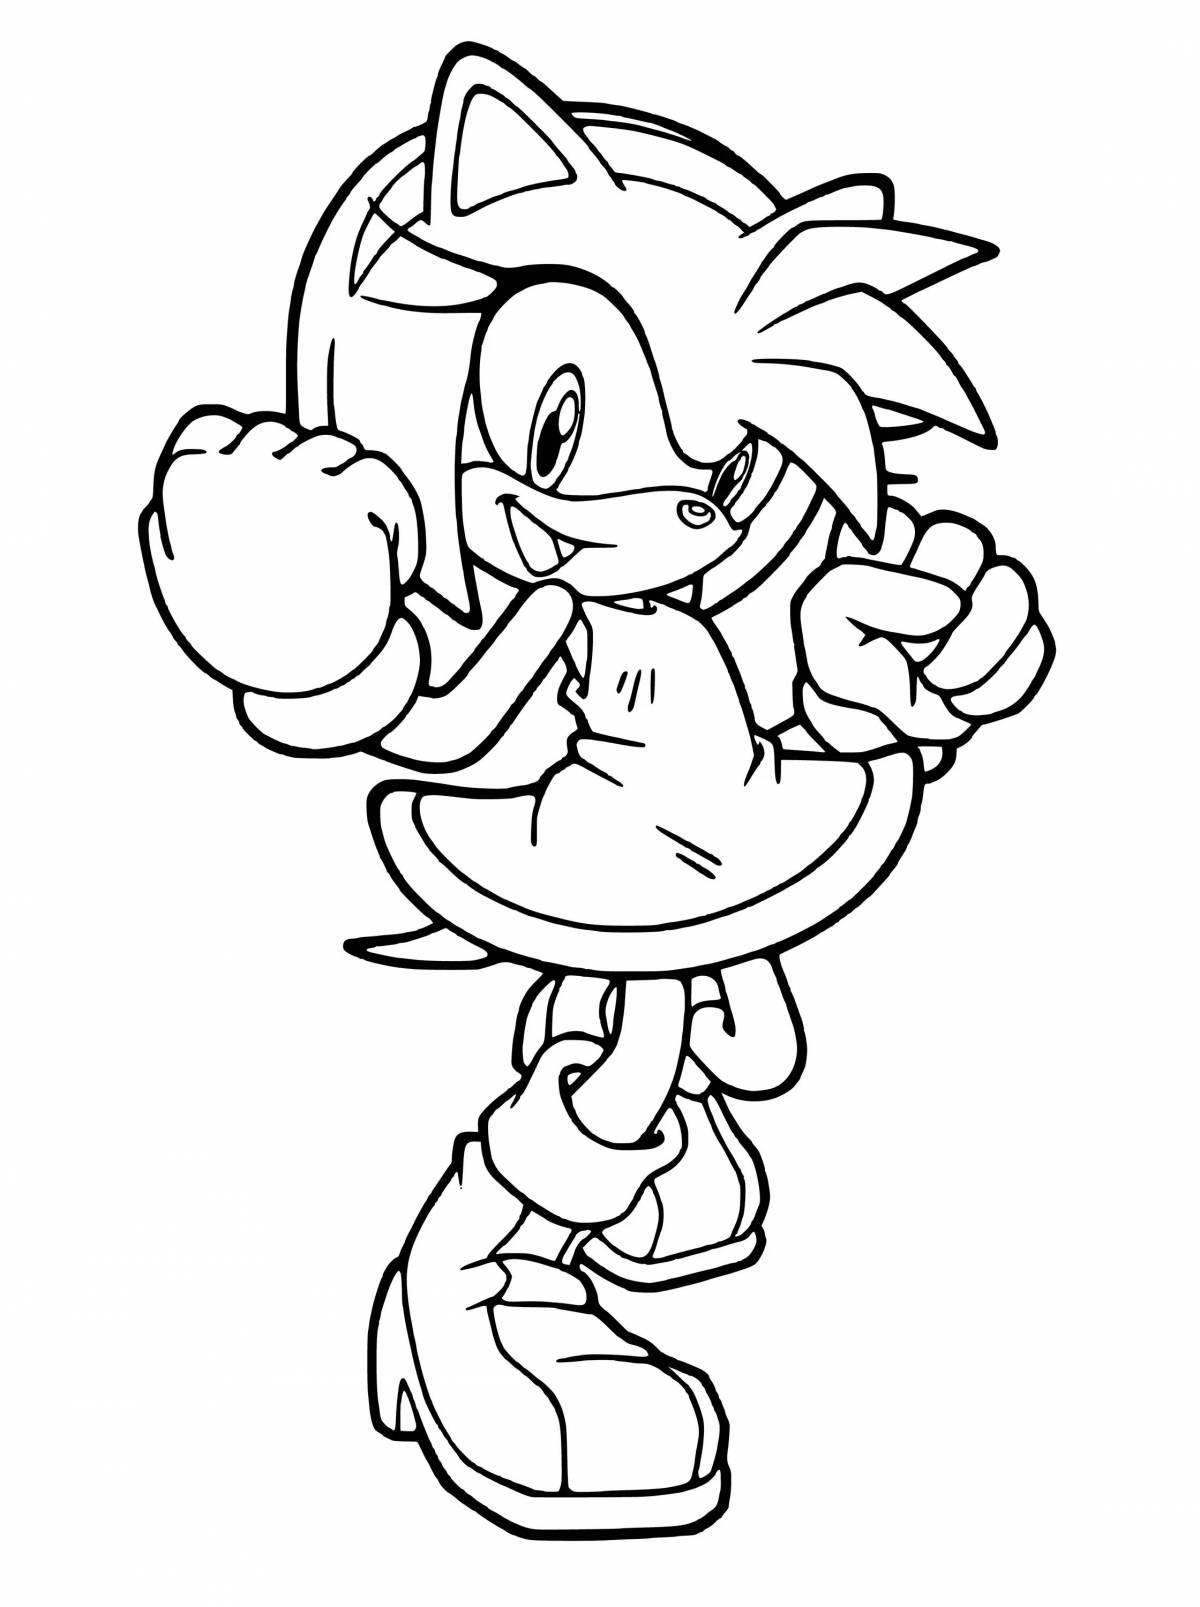 Funny sonic coloring book for kids 5-6 years old